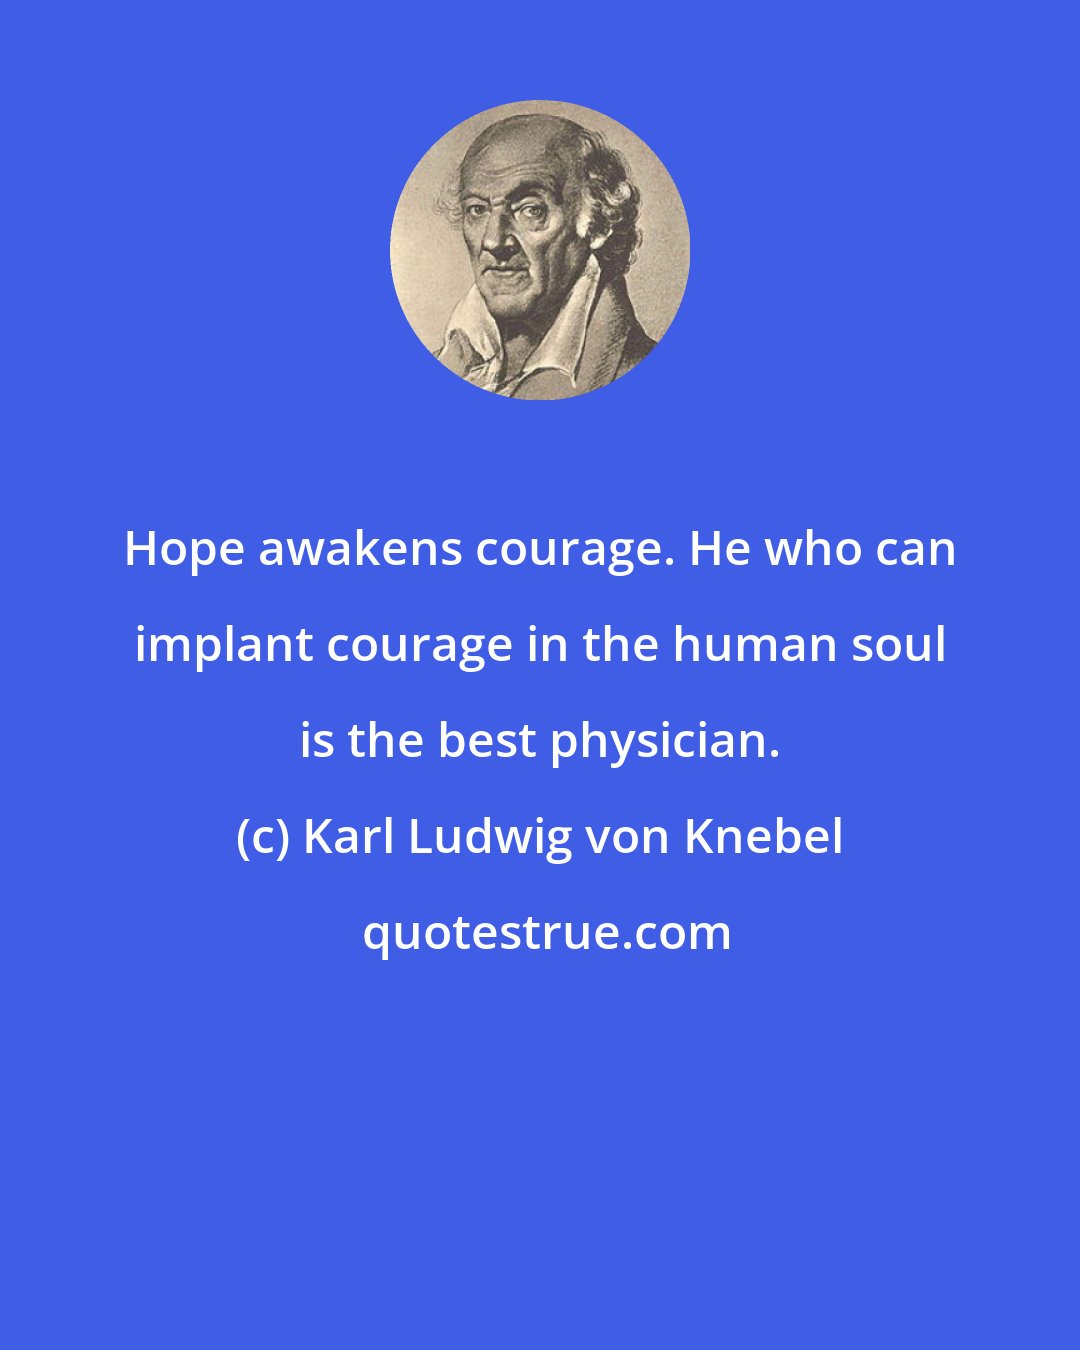 Karl Ludwig von Knebel: Hope awakens courage. He who can implant courage in the human soul is the best physician.